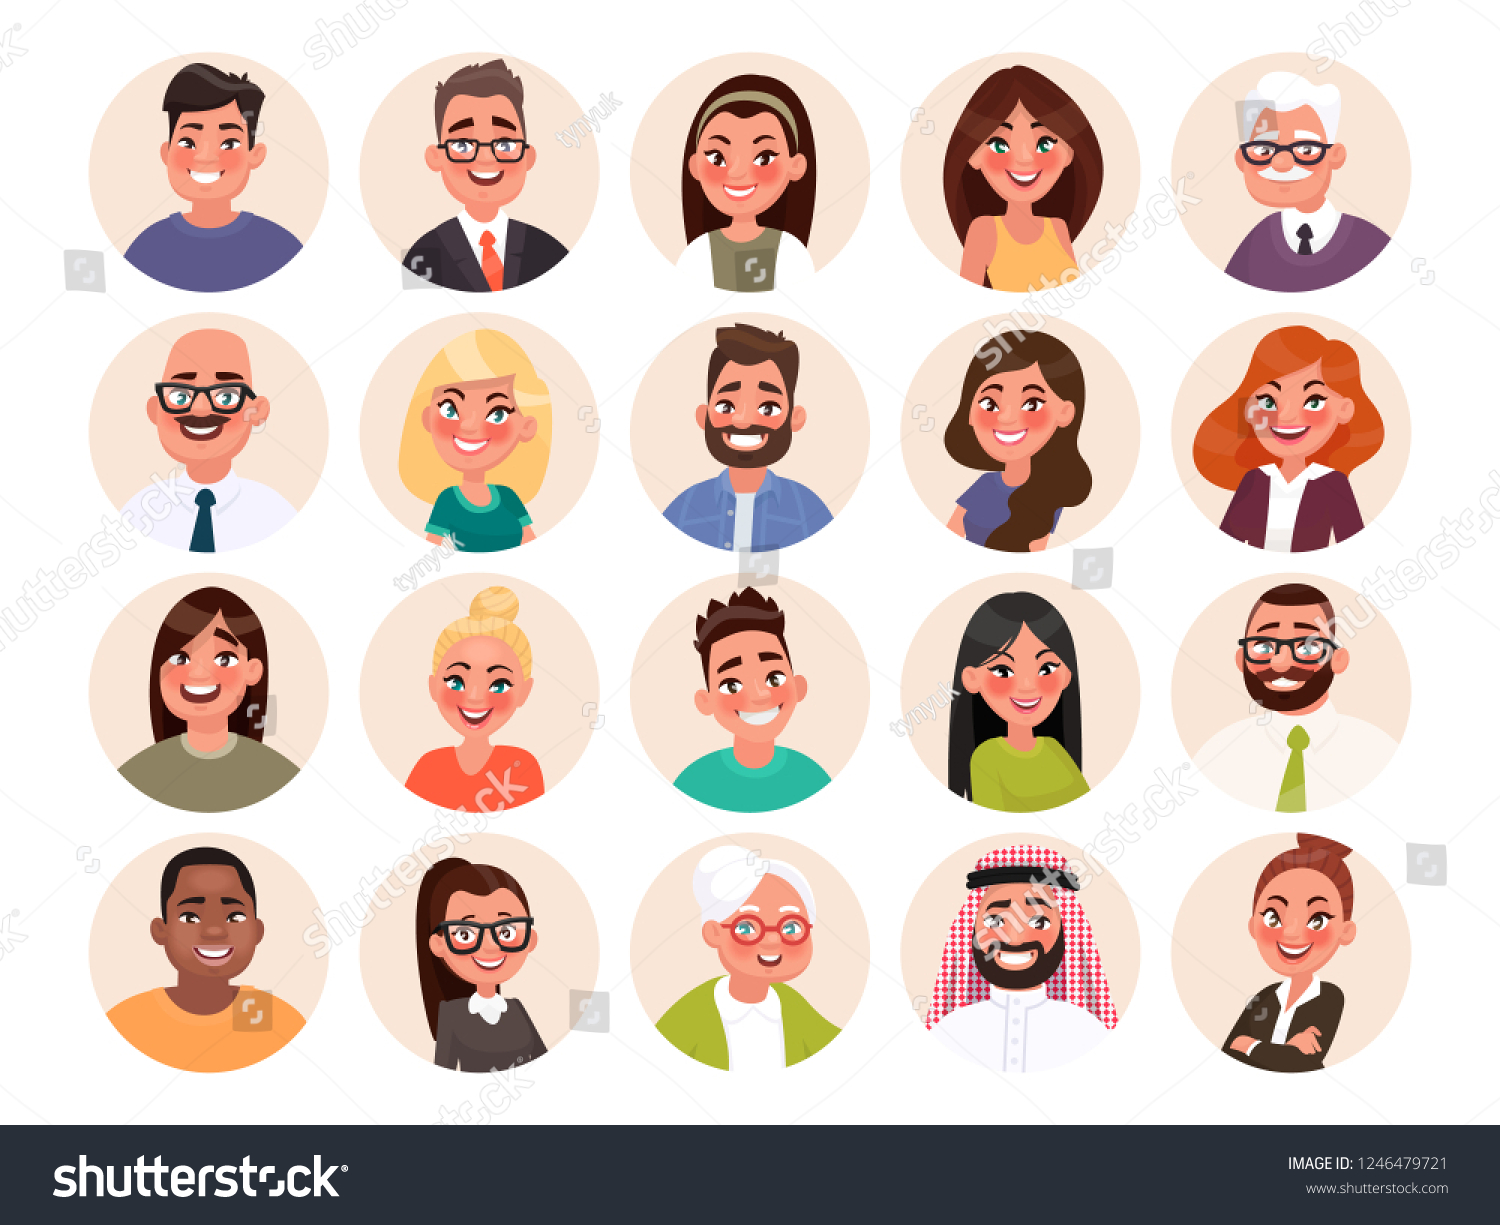 SVG of Set of avatars of happy people of different races and age. Portraits of men and women. Vector illustration in cartoon style. svg